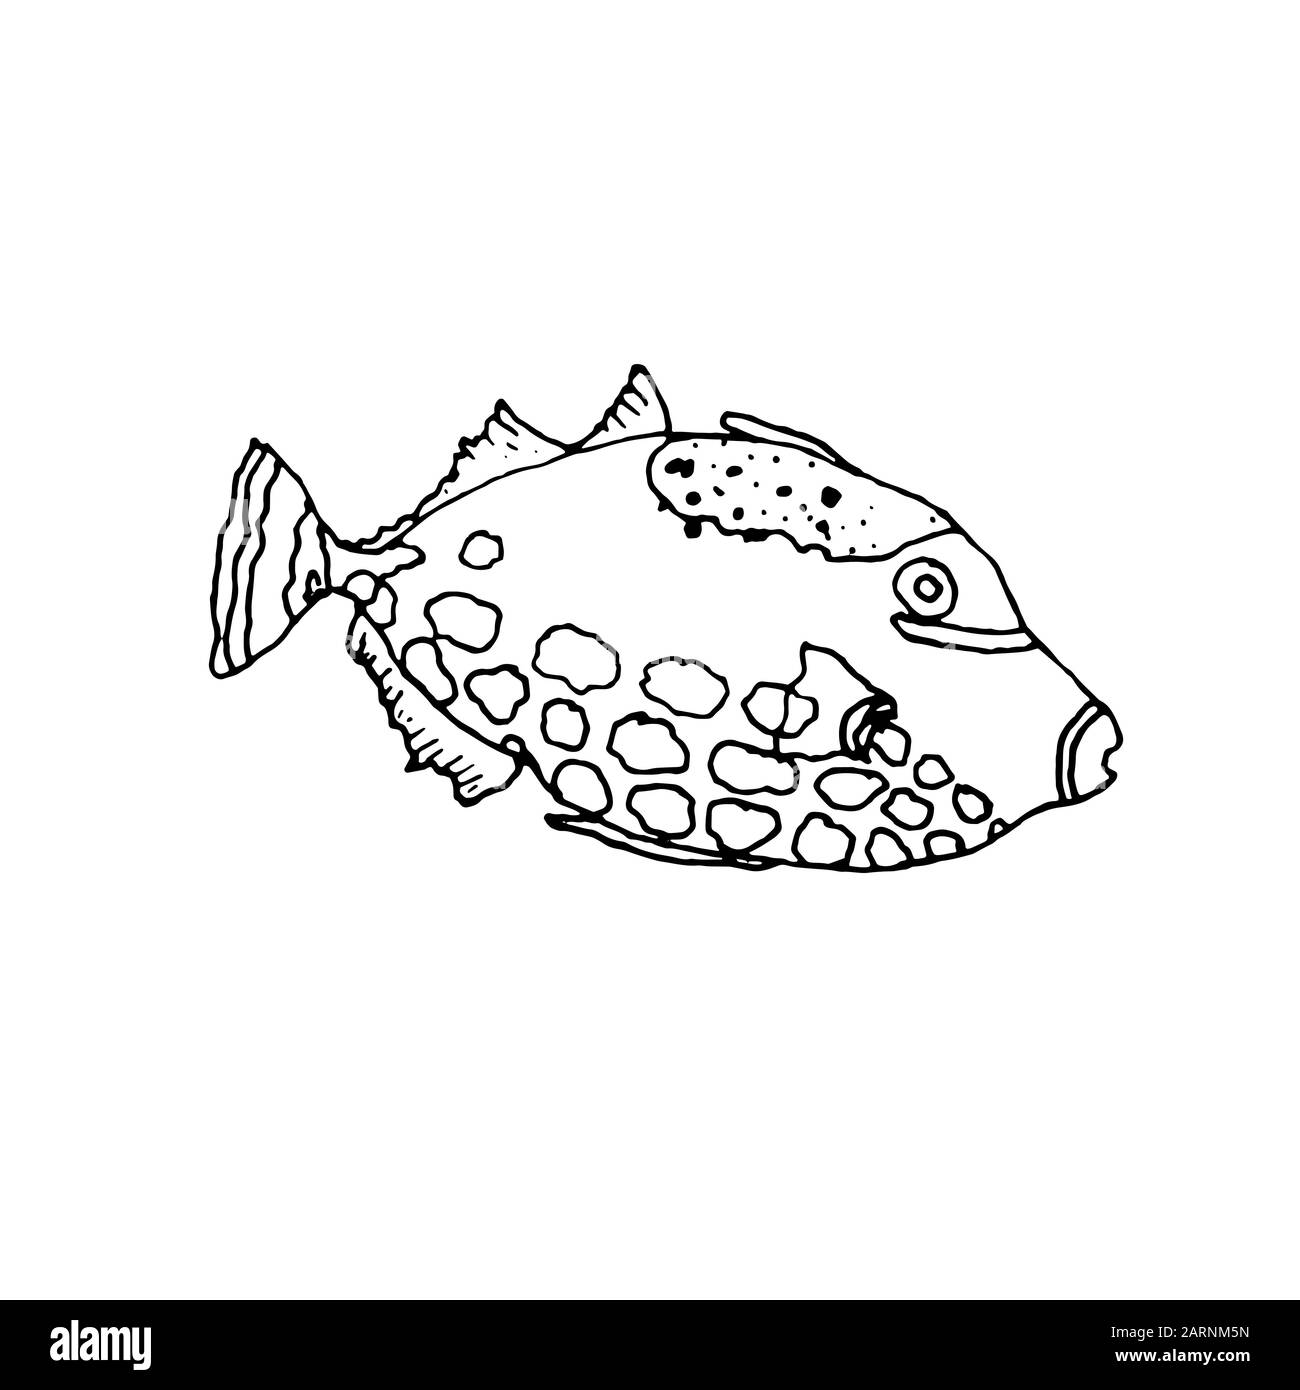 Clown trigger fish. Hand drawing sketch. Black outline on white background. Vector illustration can be used in greeting cards, posters, flyers, banners, logo, further design etc. EPS10 Stock Vector